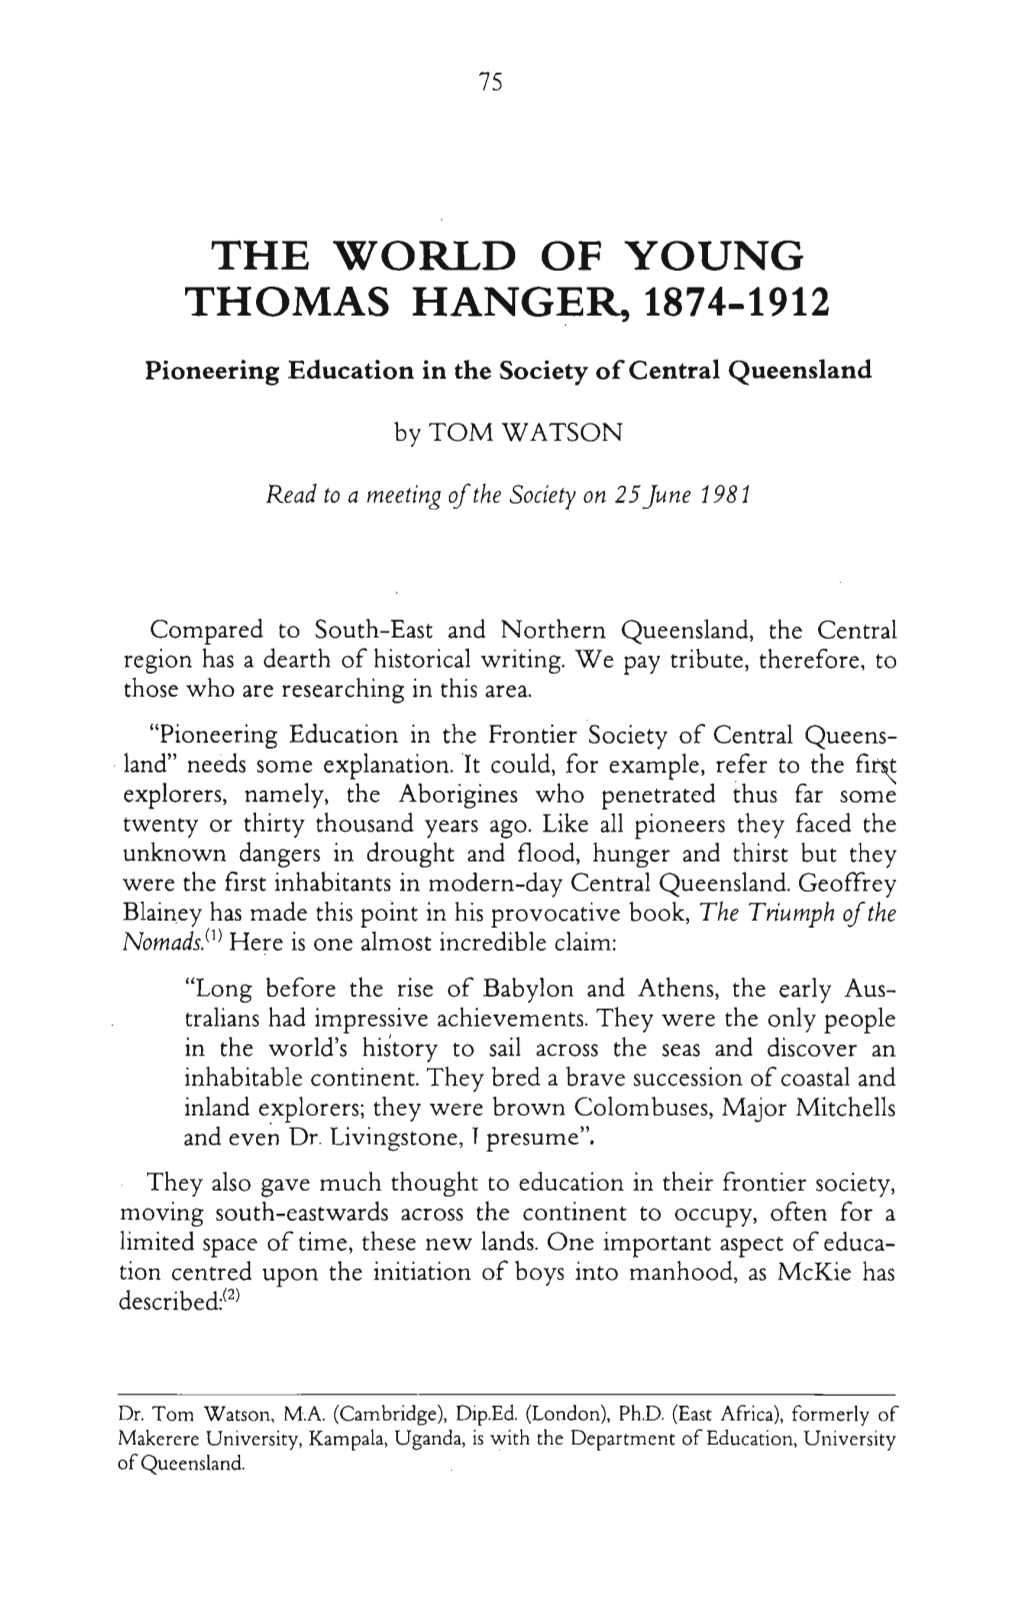 The World of Young Thomas Hanger, 1874-1912